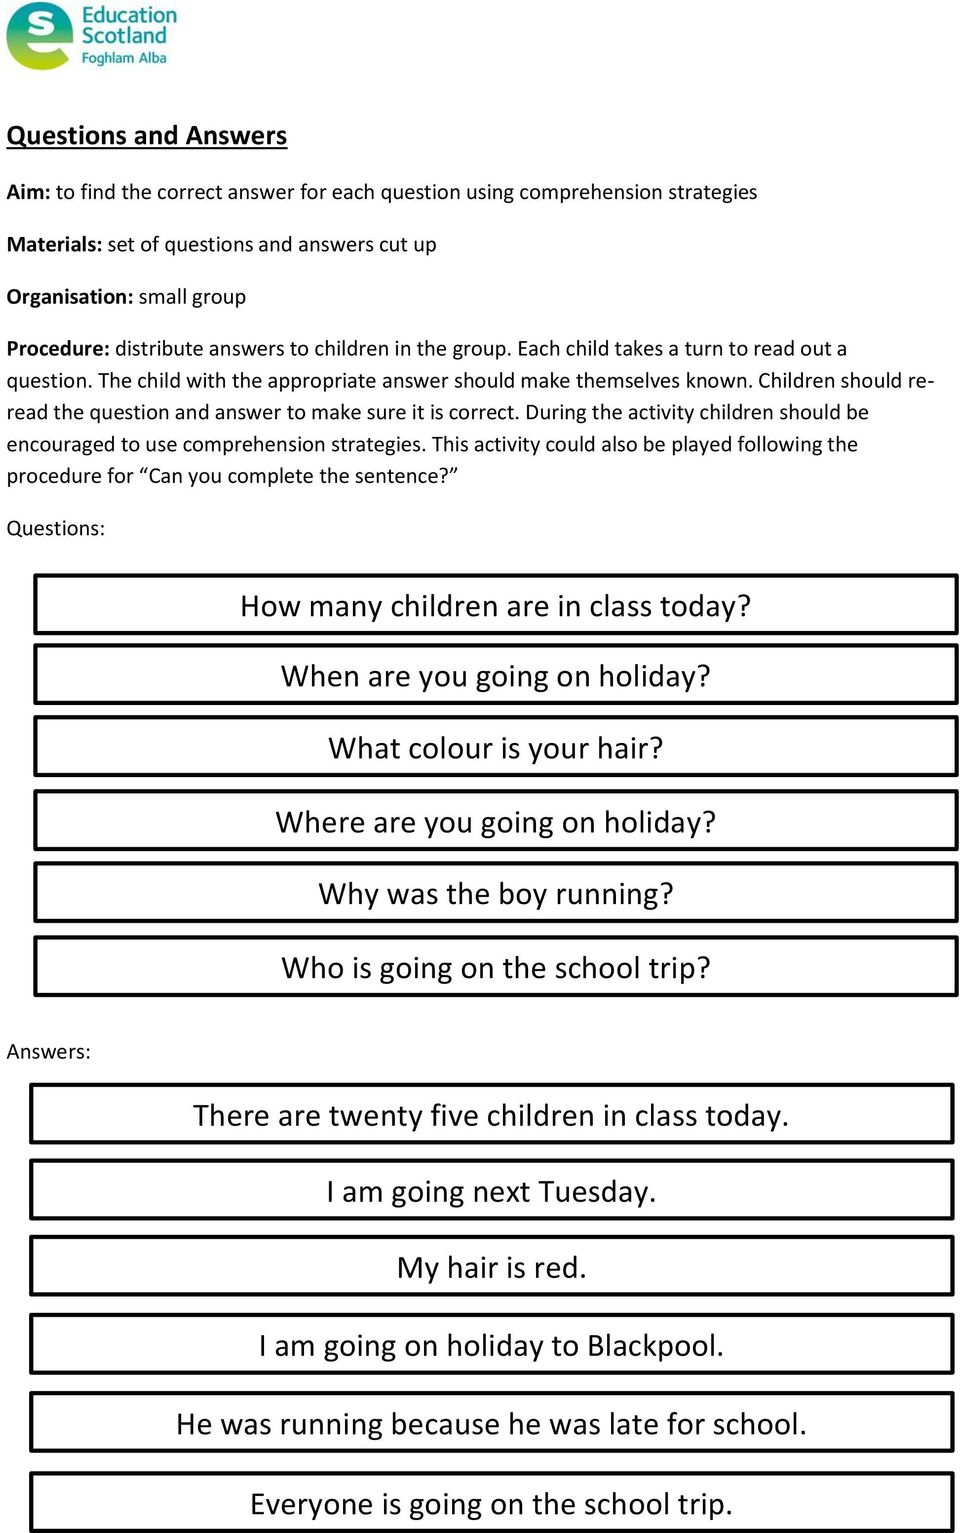 Children should reread the question and answer to make sure it is correct. During the activity children should be encouraged to use comprehension strategies.